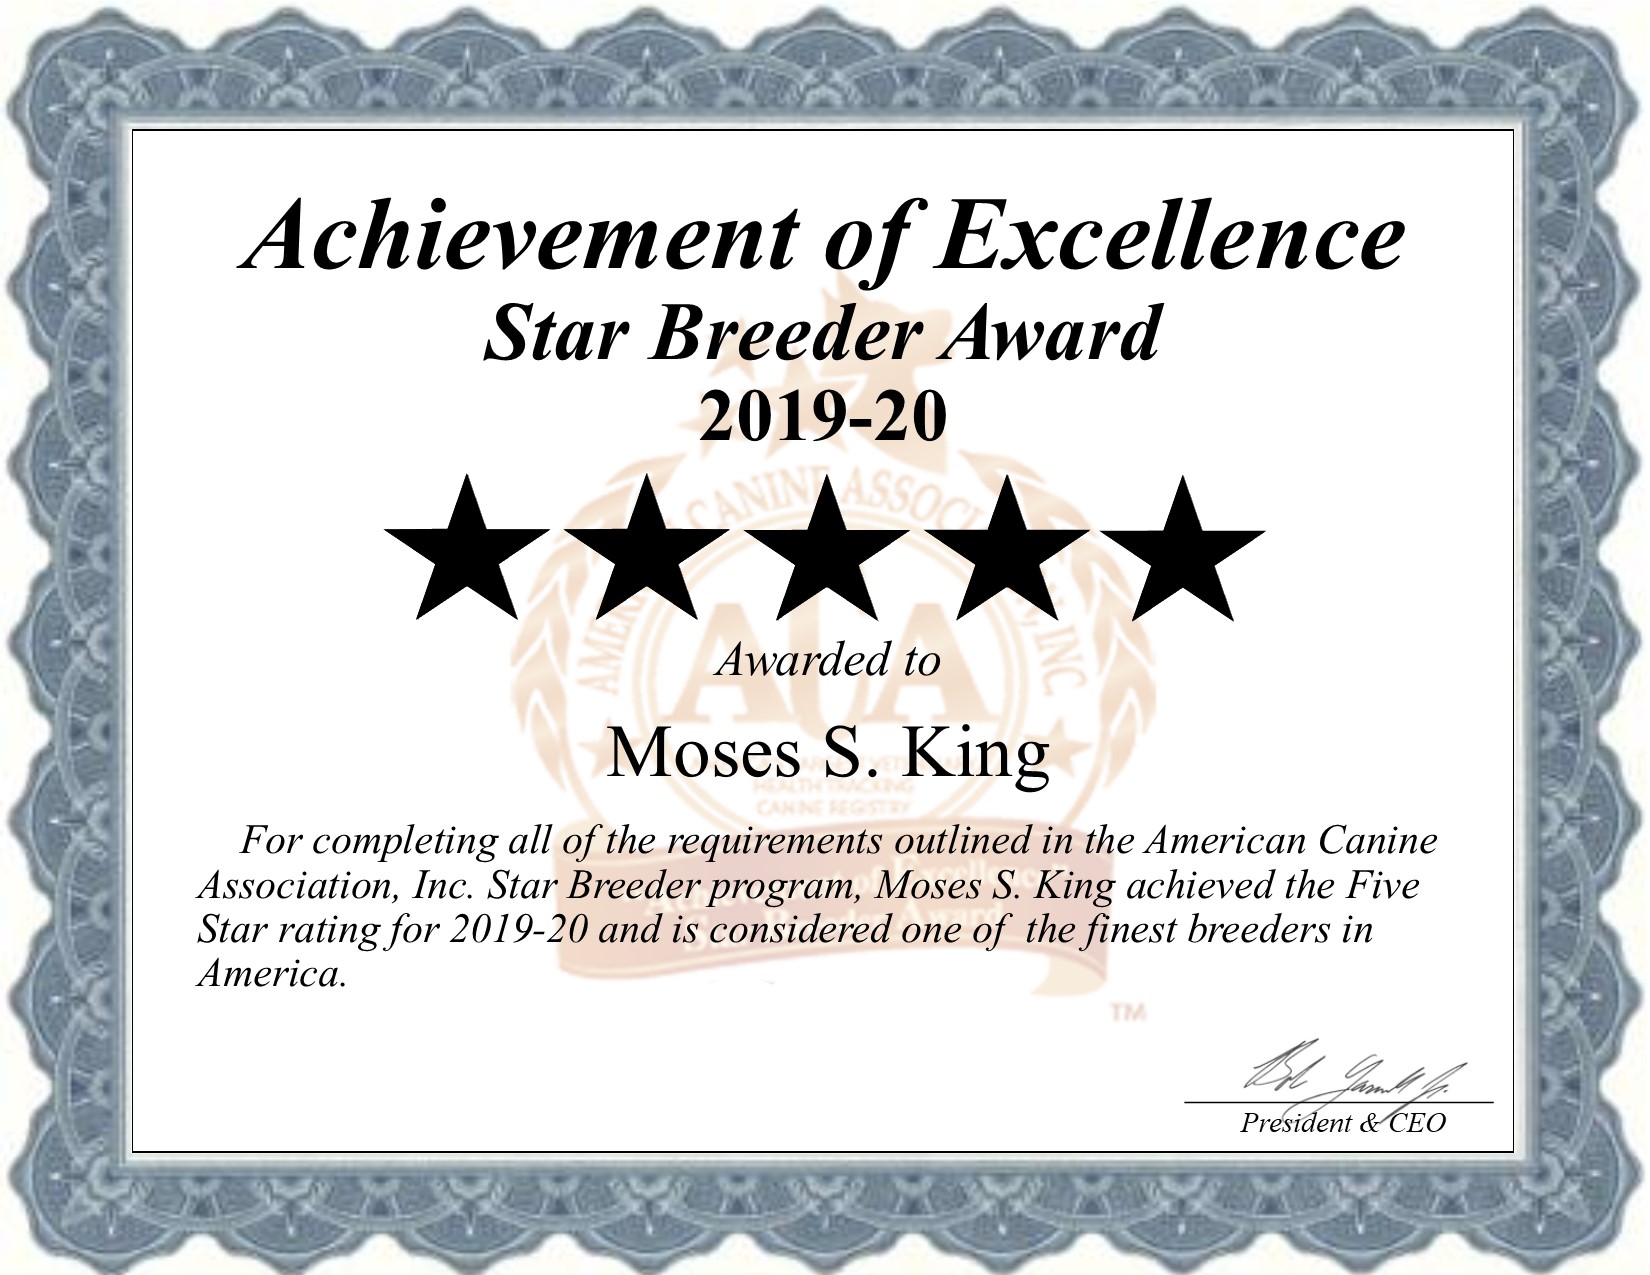 Moses S., King, Moses S. King, King Kennel, breeder, star breeder, aca, star breeder, 5 star, Quarryville, Pennsylvania, PA, dog, puppy, puppies, dog breeder, dog breeders, Pennsylvania breeder, Moses S. King dog breeder